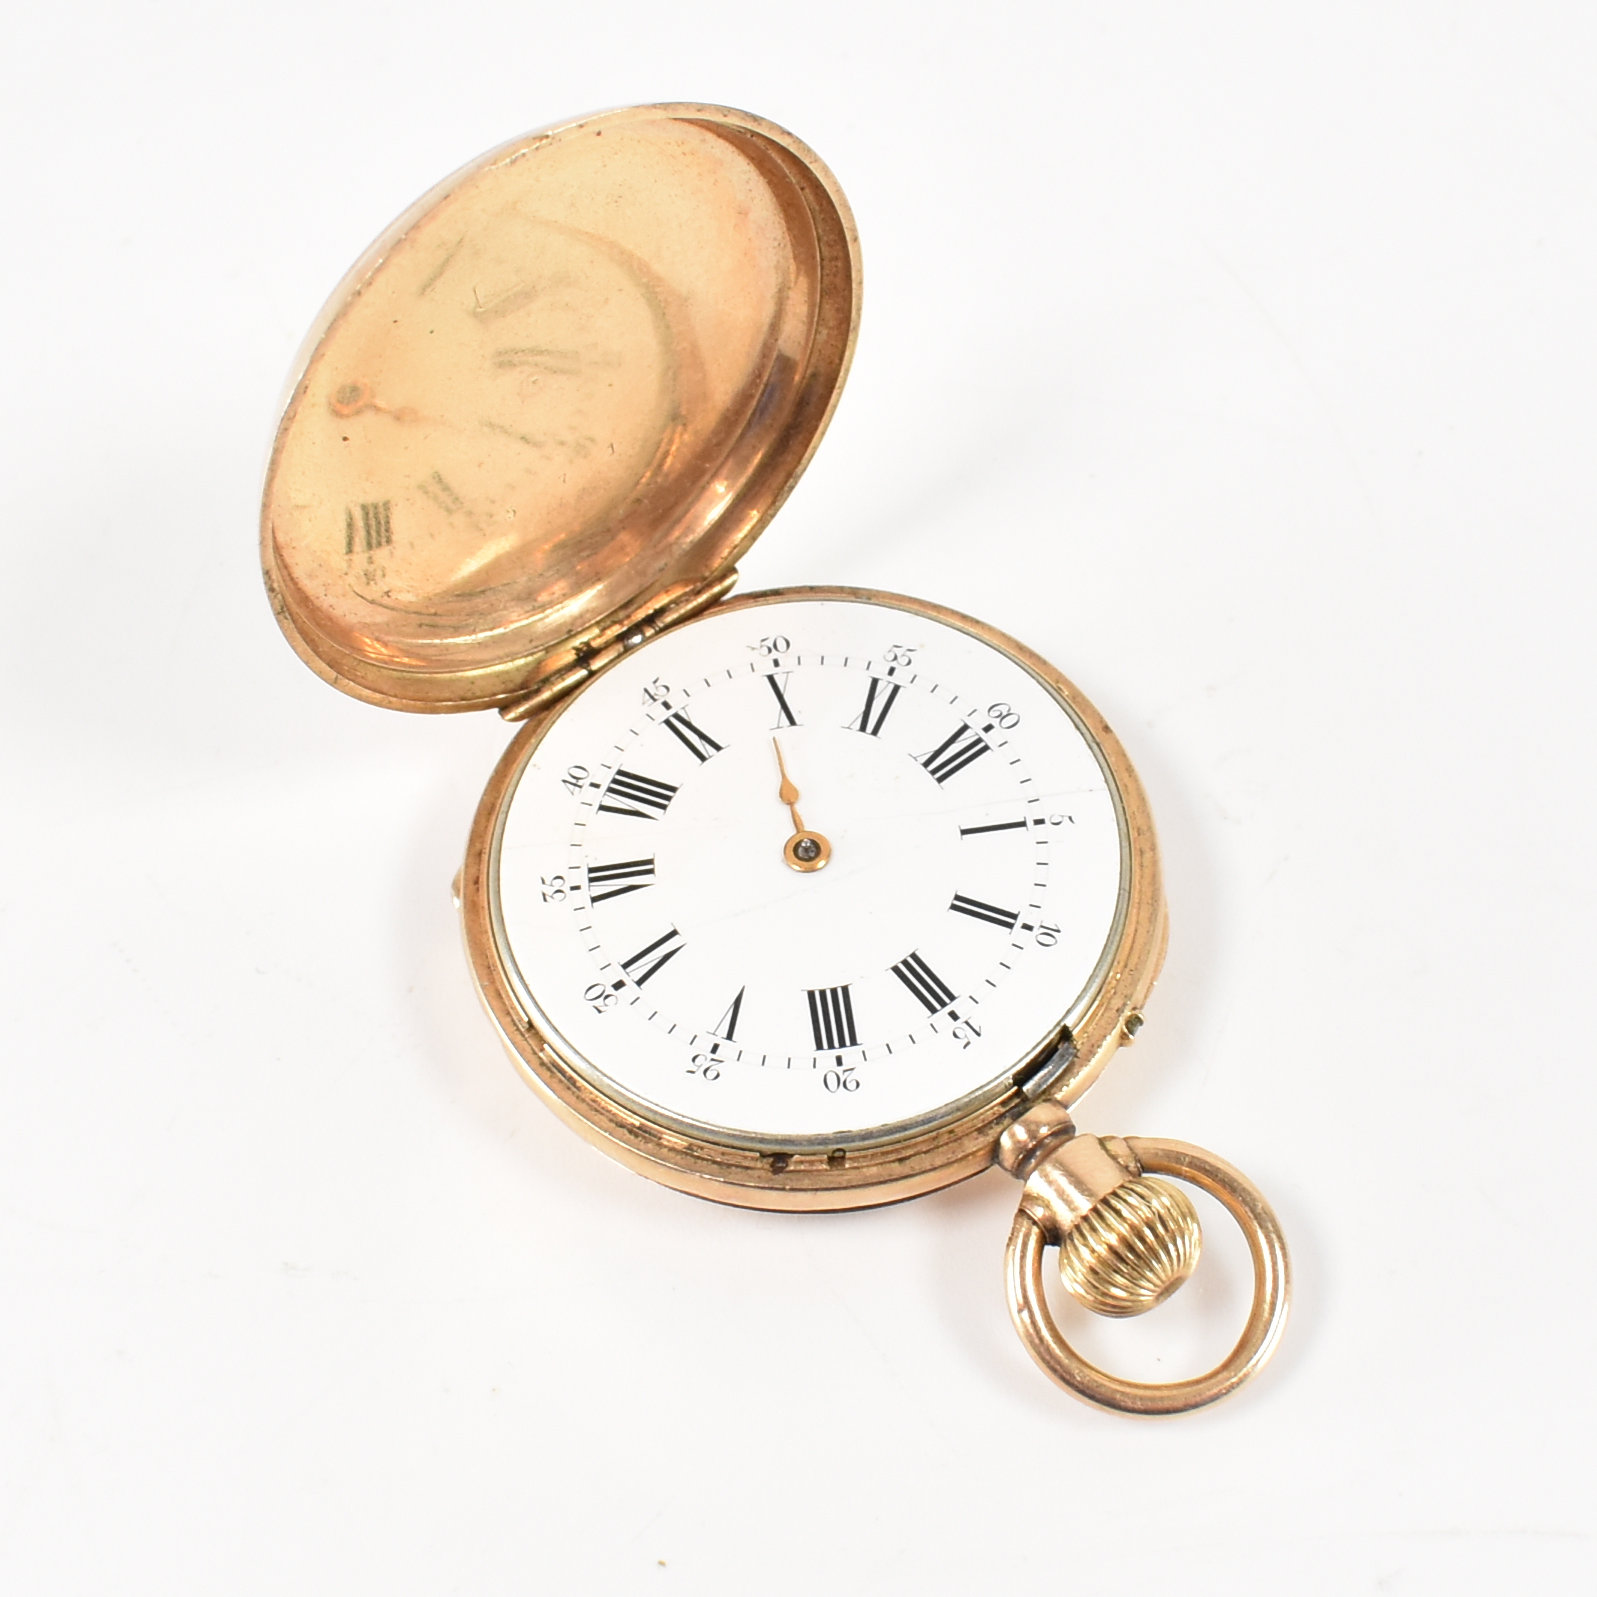 ANTIQUE 9CT GOLD FRENCH FULL HUNTER POCKET WATCH - Image 9 of 10